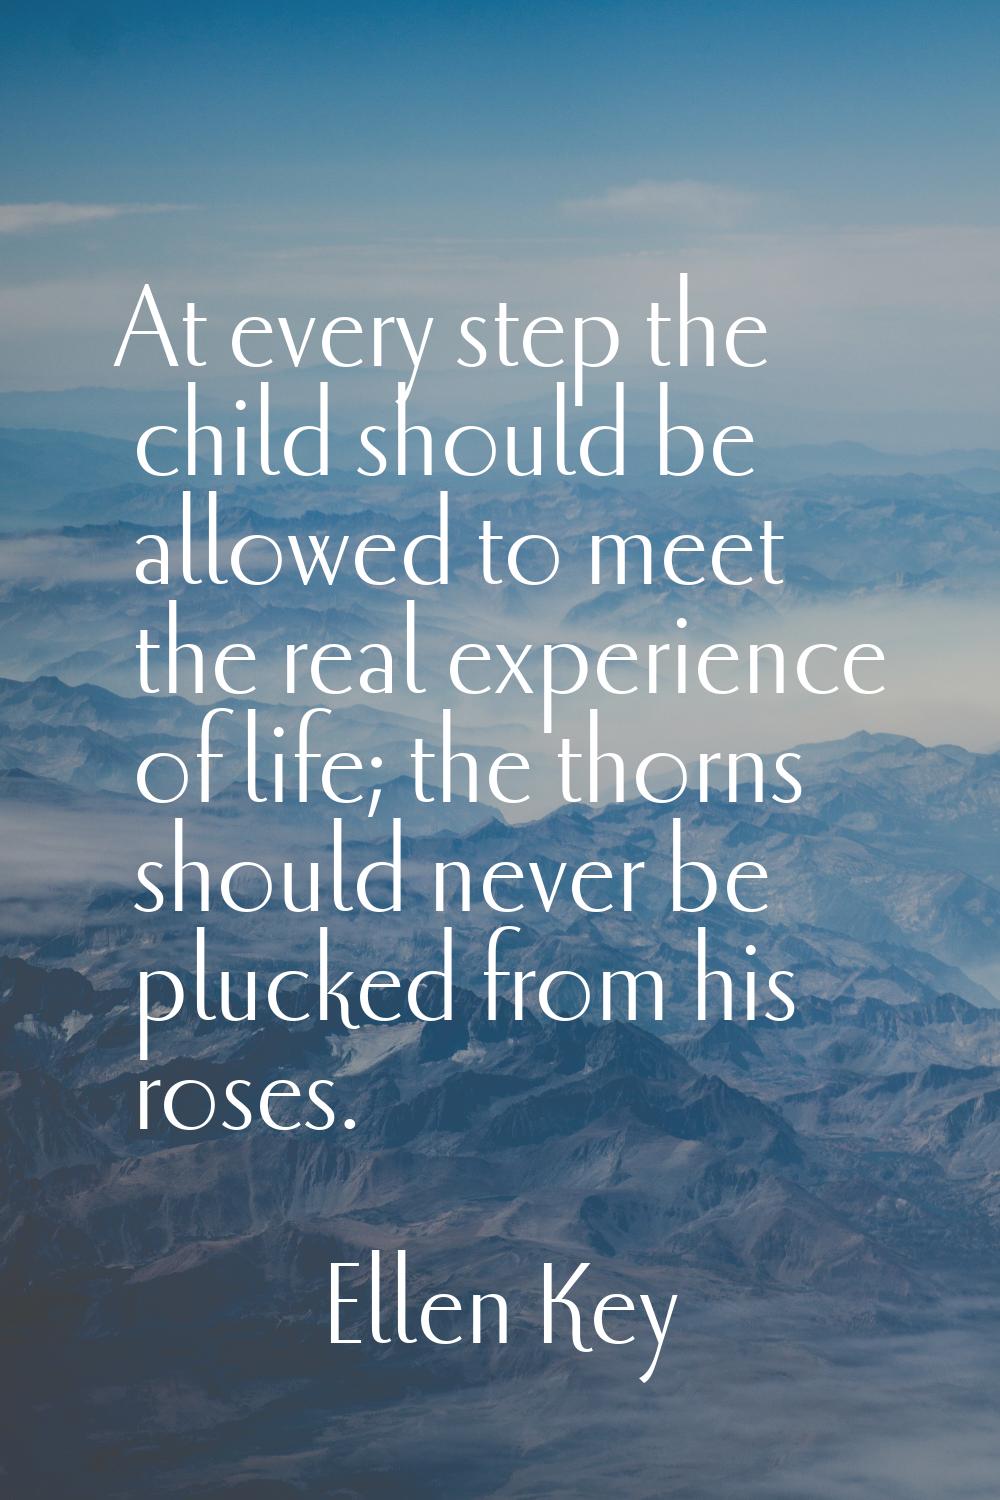 At every step the child should be allowed to meet the real experience of life; the thorns should ne